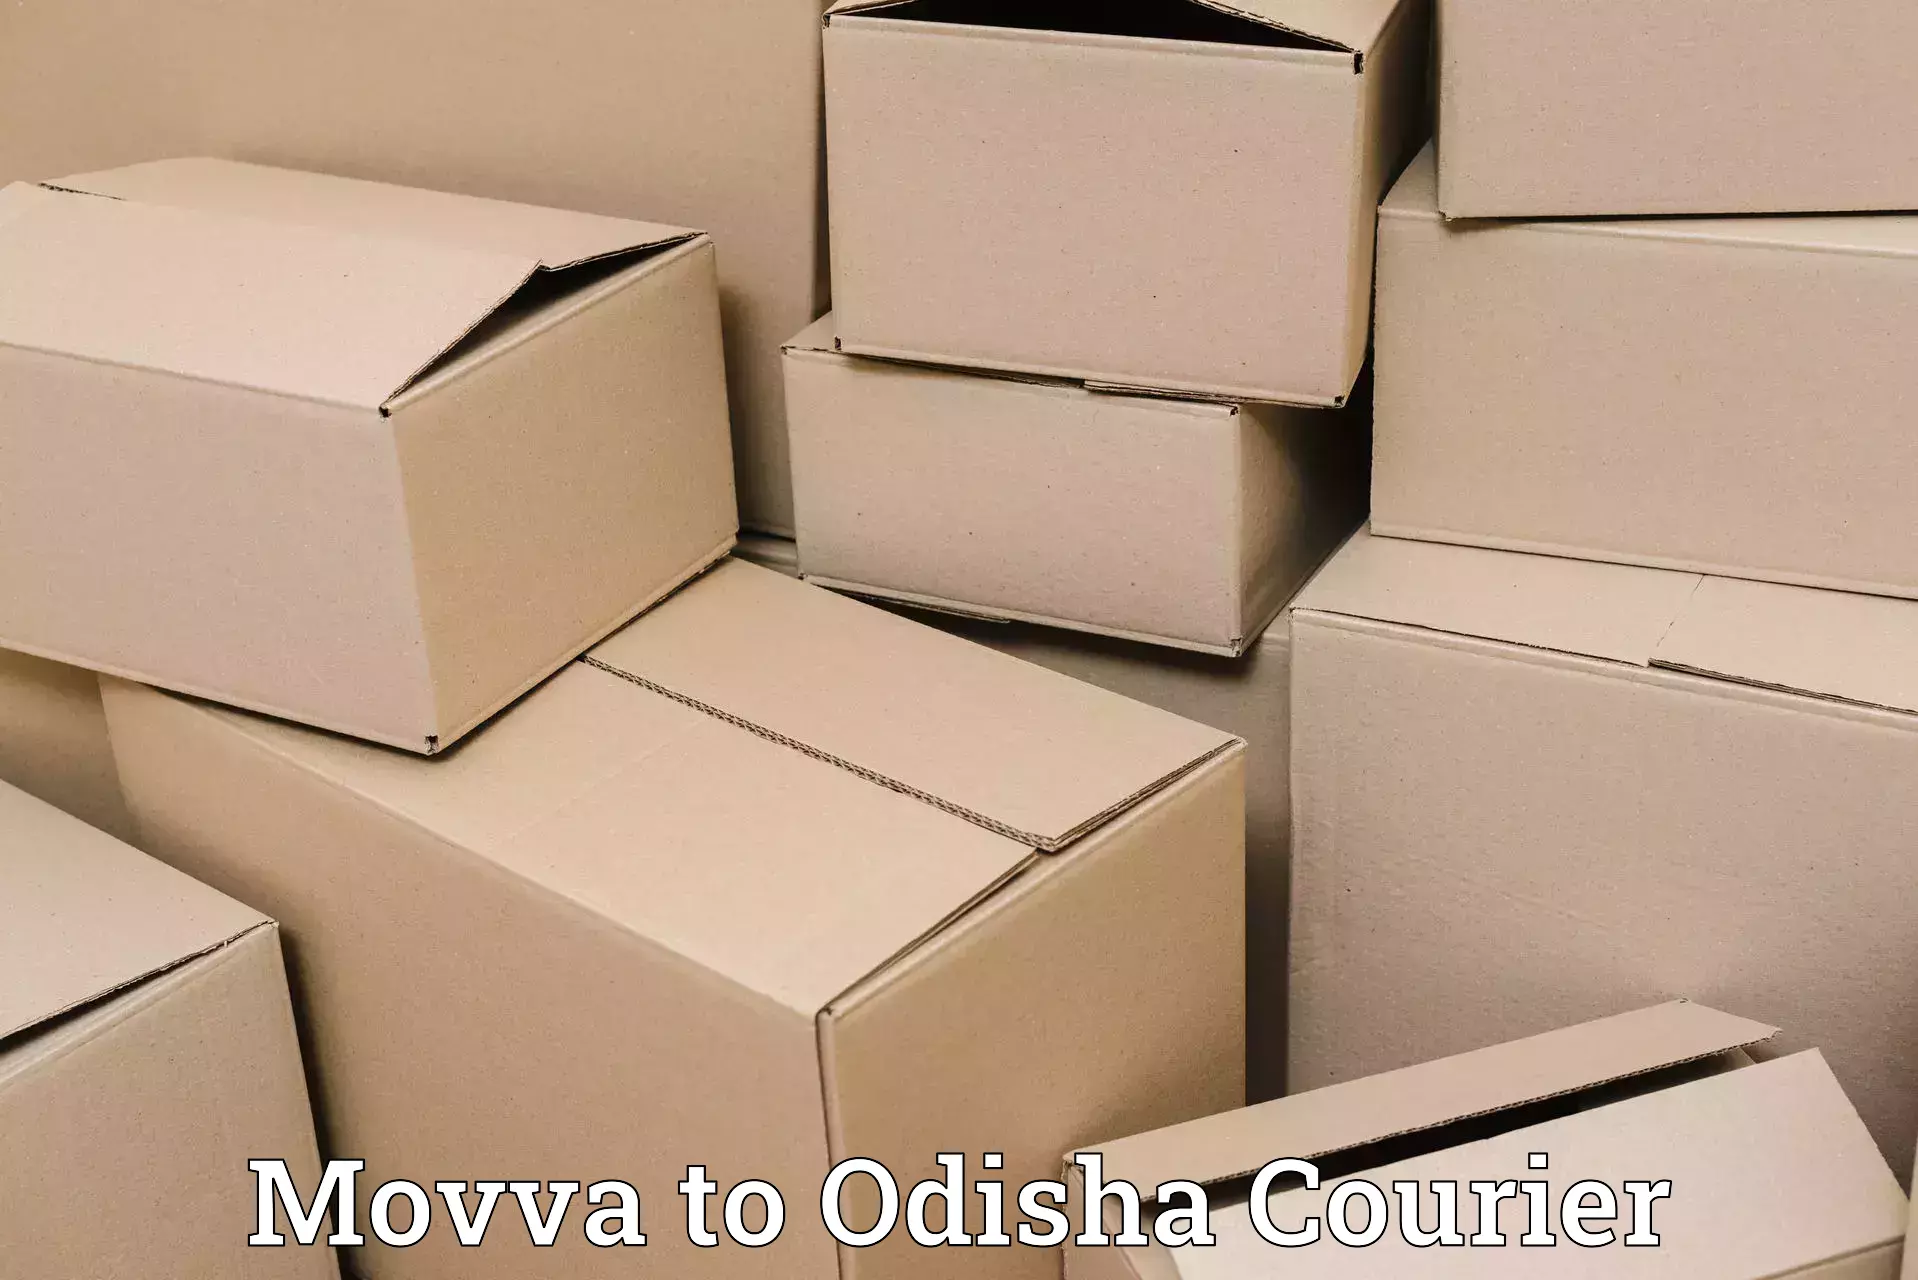 Cash on delivery service Movva to Sohela